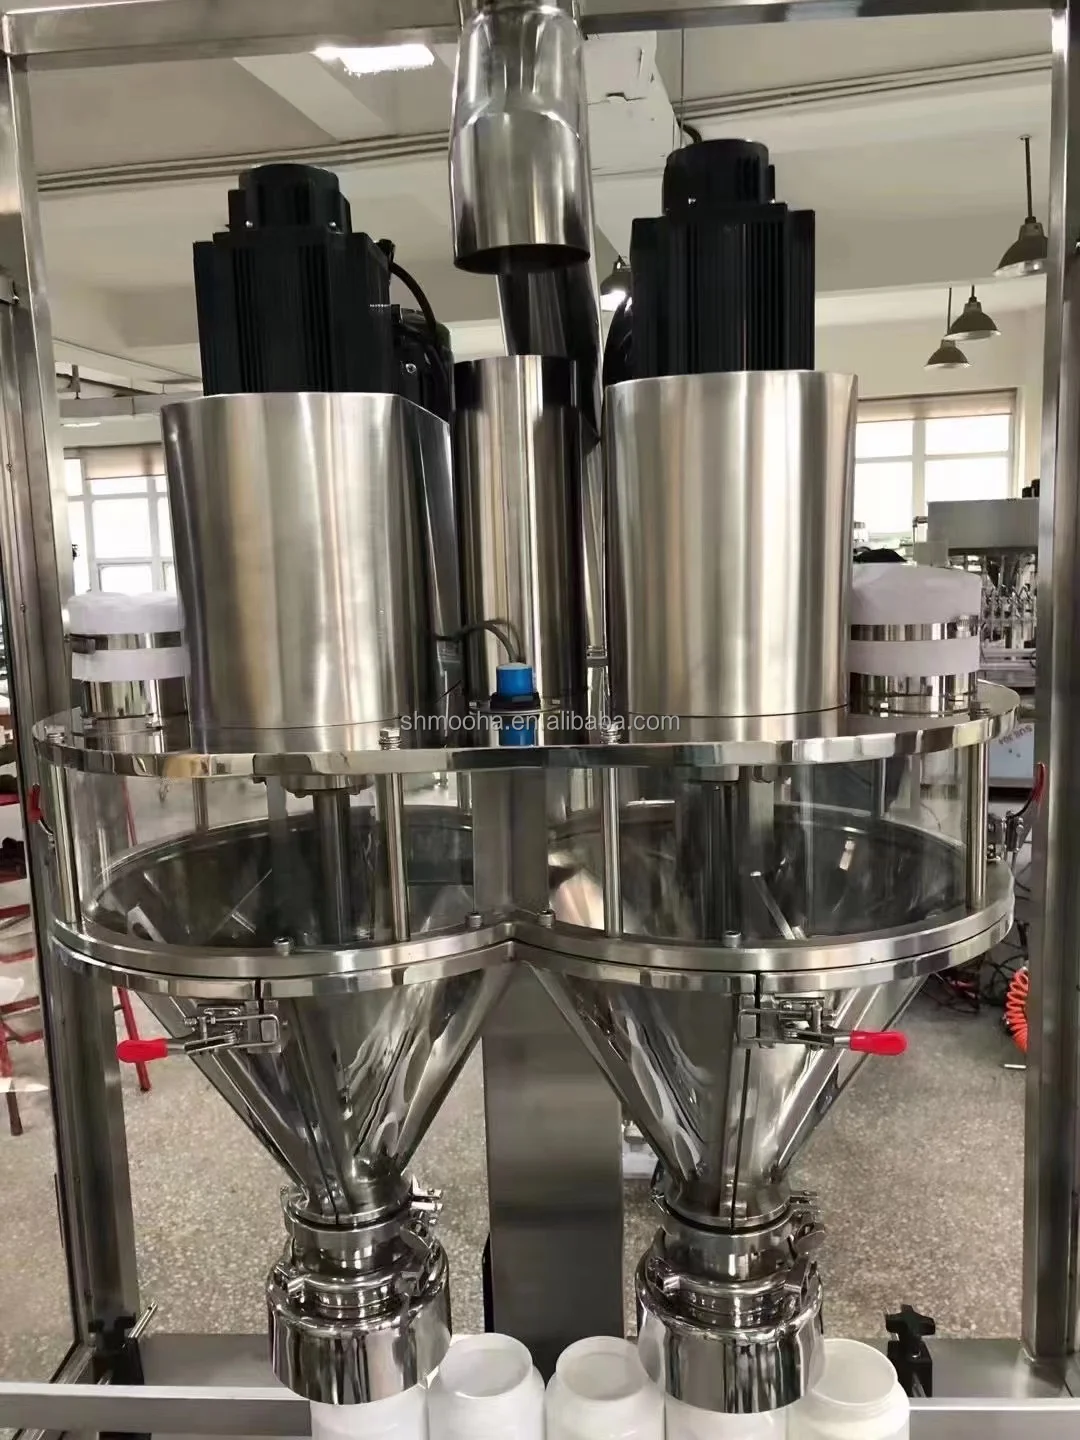 New Type Fully Automatic Double Head 900g Milk Powder Filling Production Line For Supplement salt sugar seasoning bottler